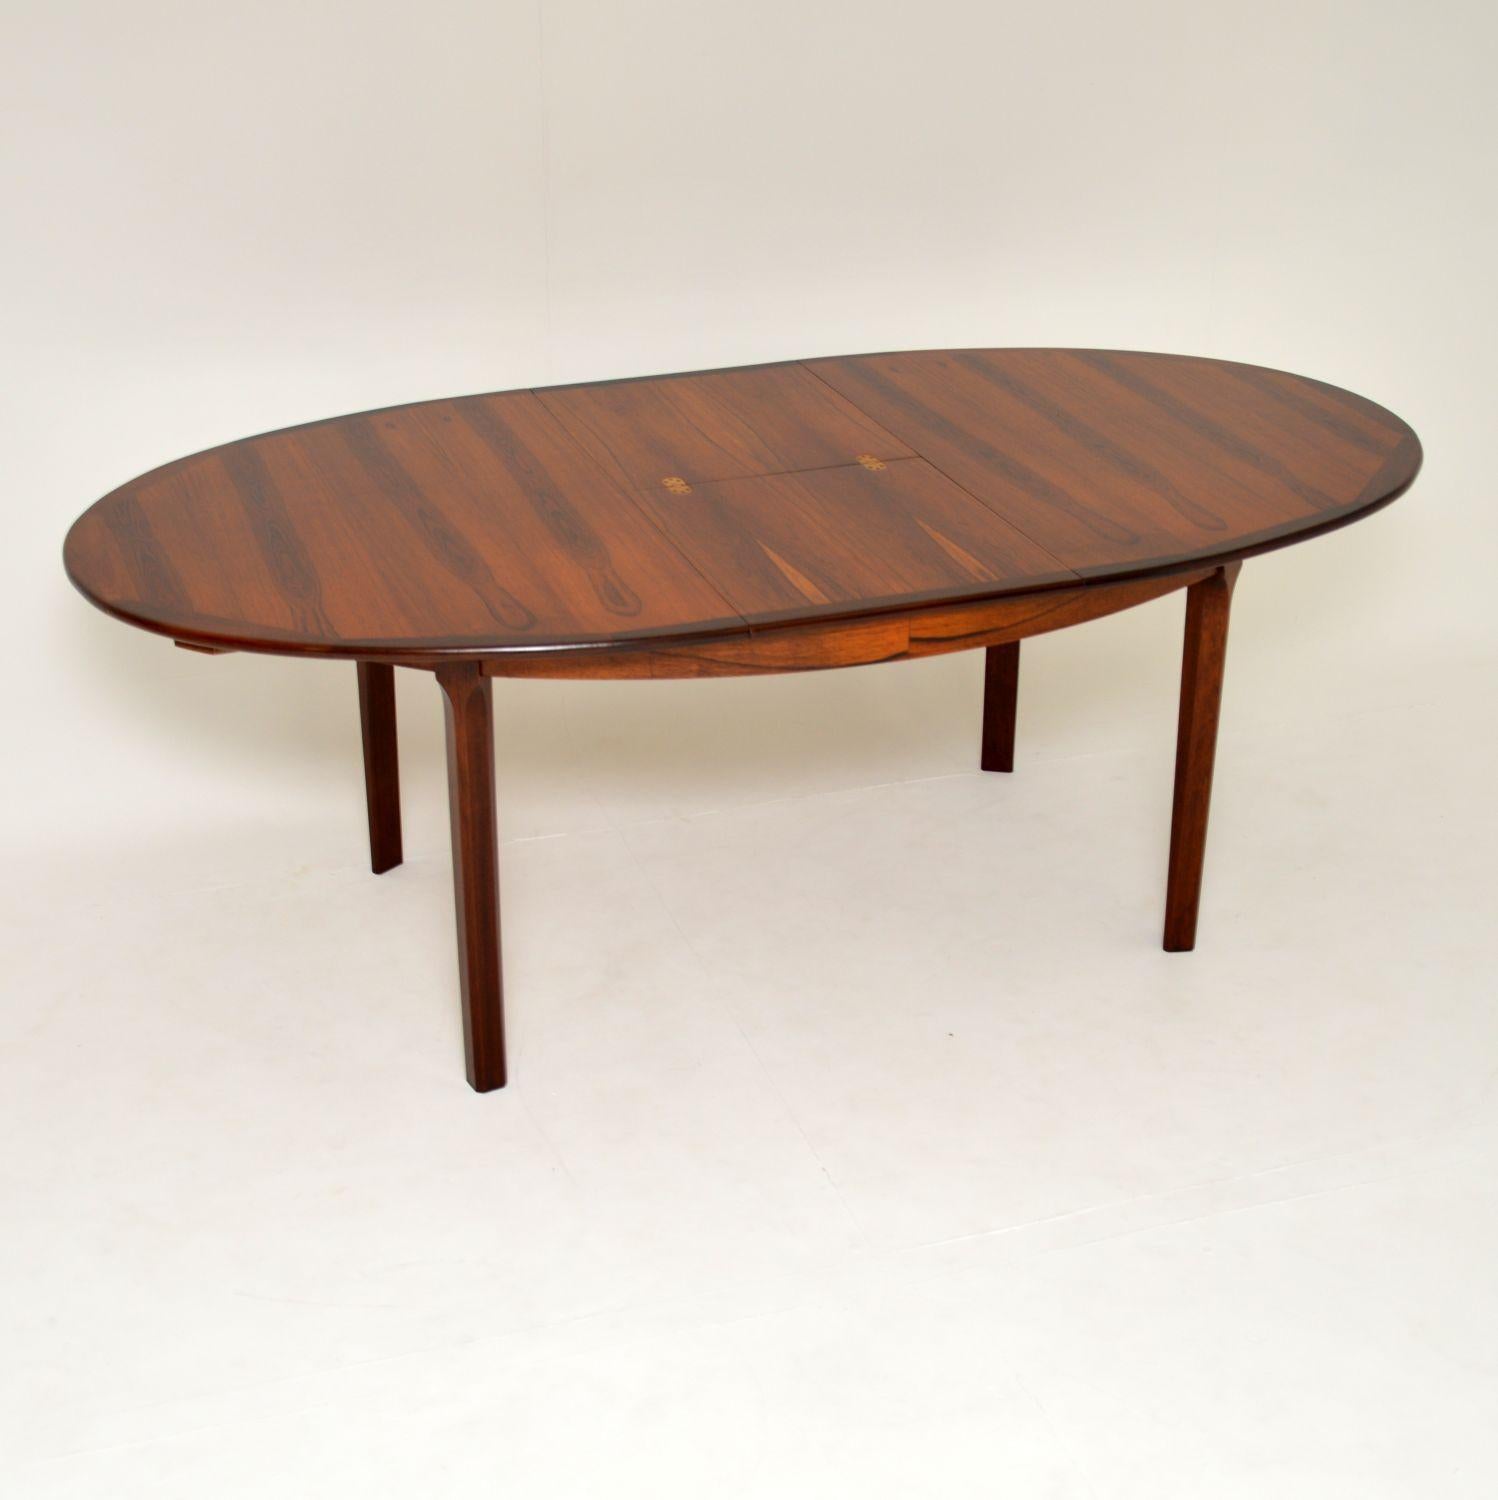 A beautiful vintage dining table, made in Denmark and dating from the 1960s. This is of great quality, it has a beautiful color and stunning wood grain patterns.

This has an extra leaf to extend the dining area, it folds down and stores under the